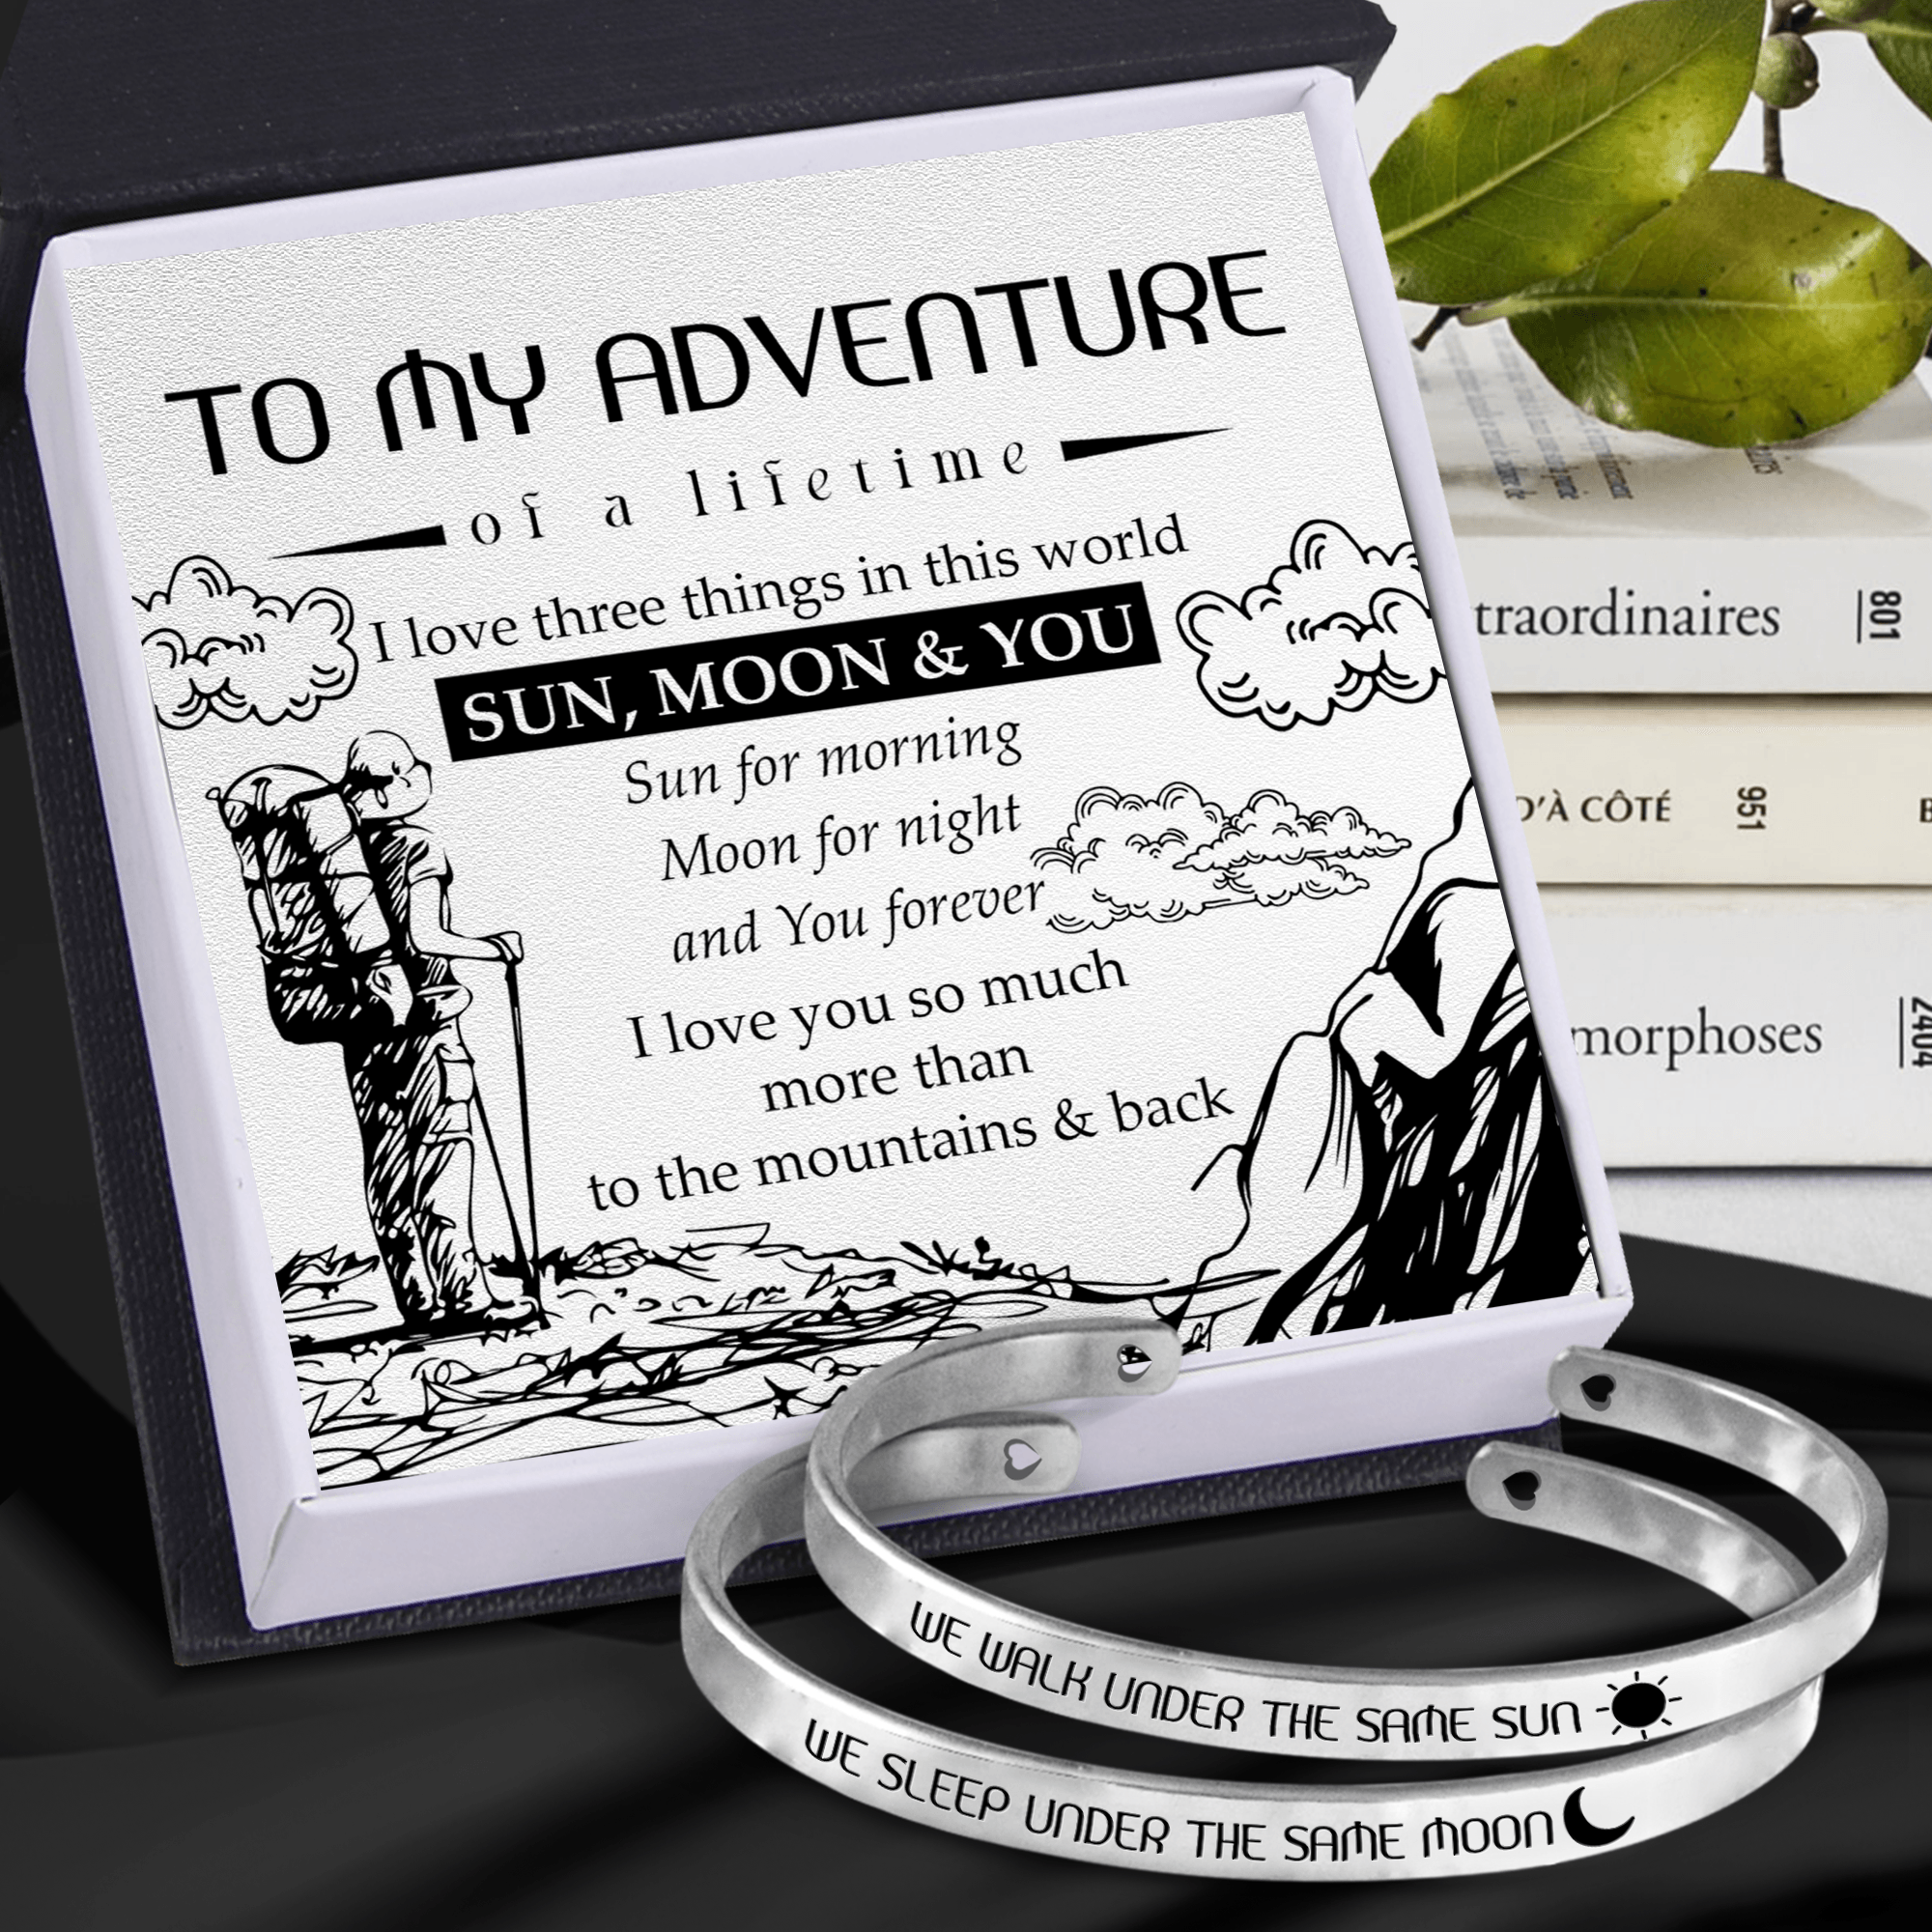 Couple Bracelets - Hiking - To My Adventure - I Love You So Much More Than To The Mountains & Back - Augbt13018 - Gifts Holder